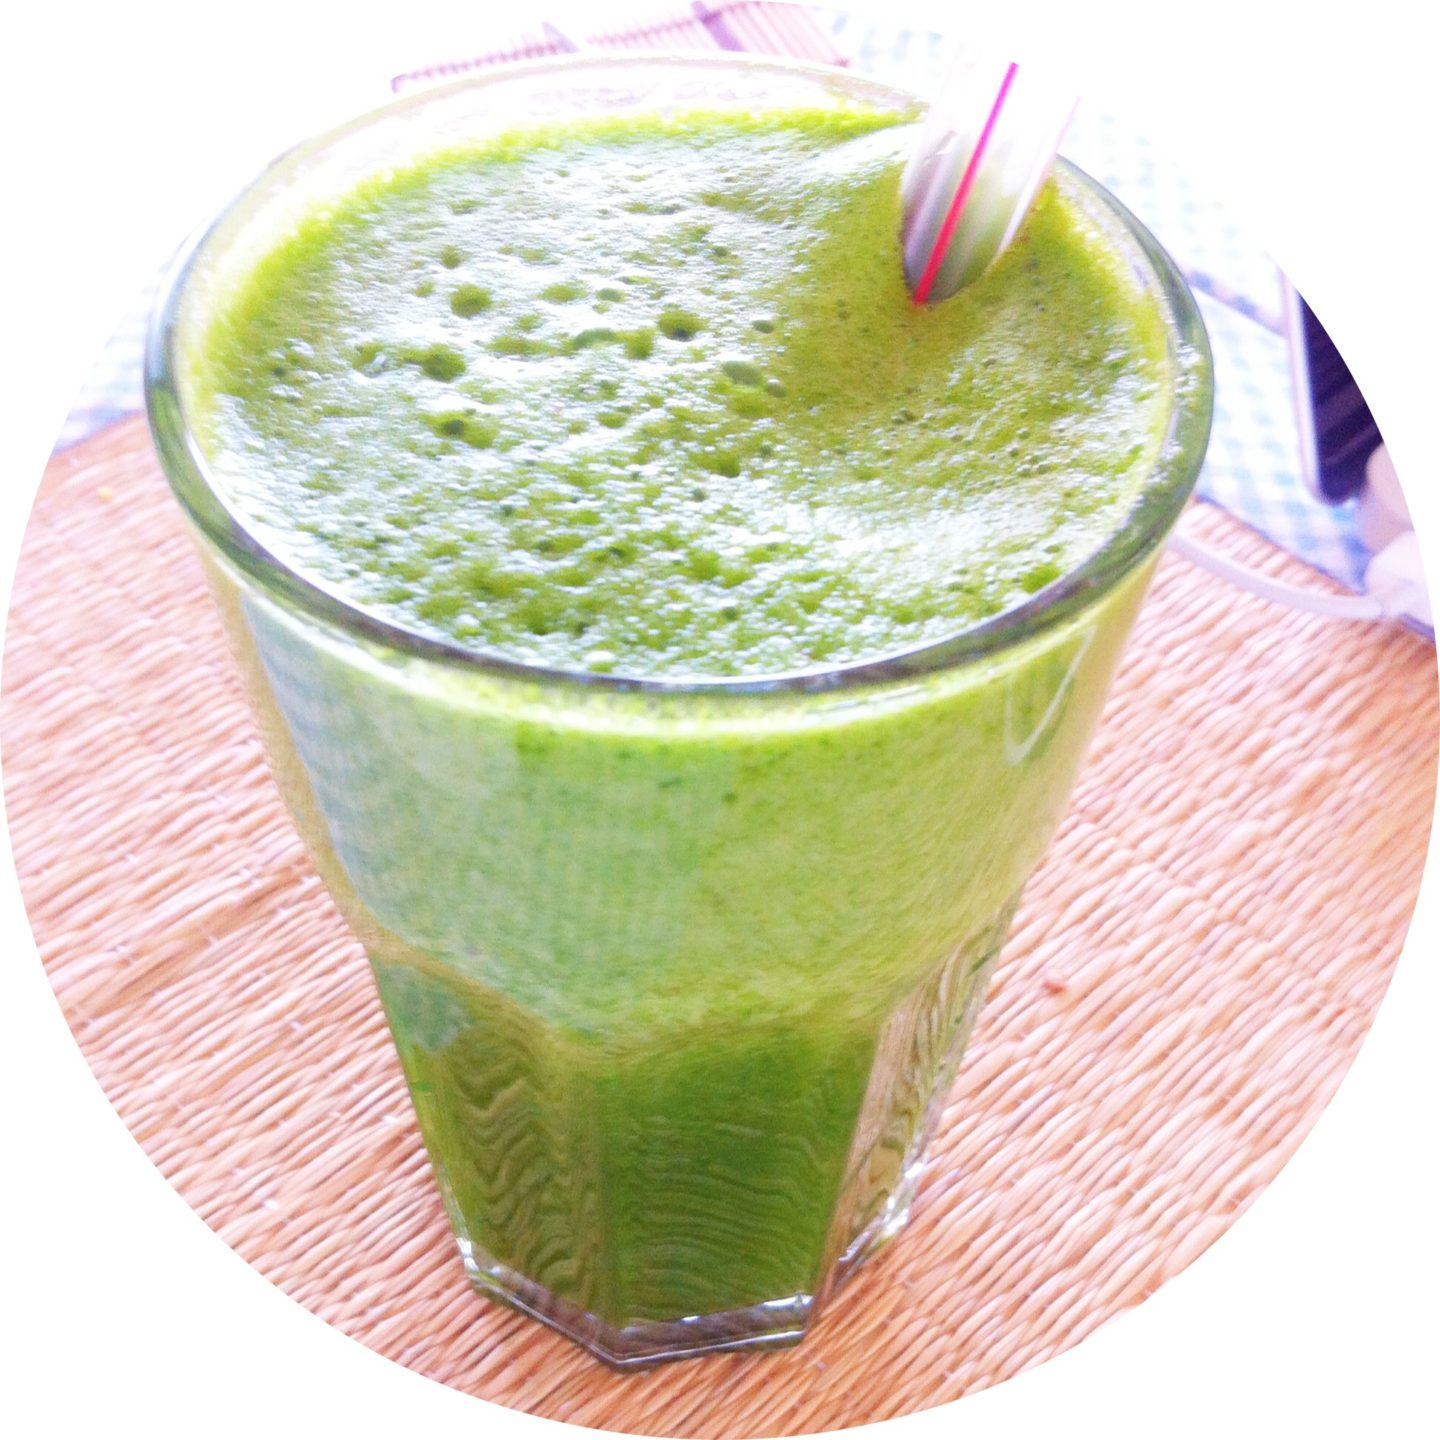 PSLily Boutique: Homemade, green juice recipe